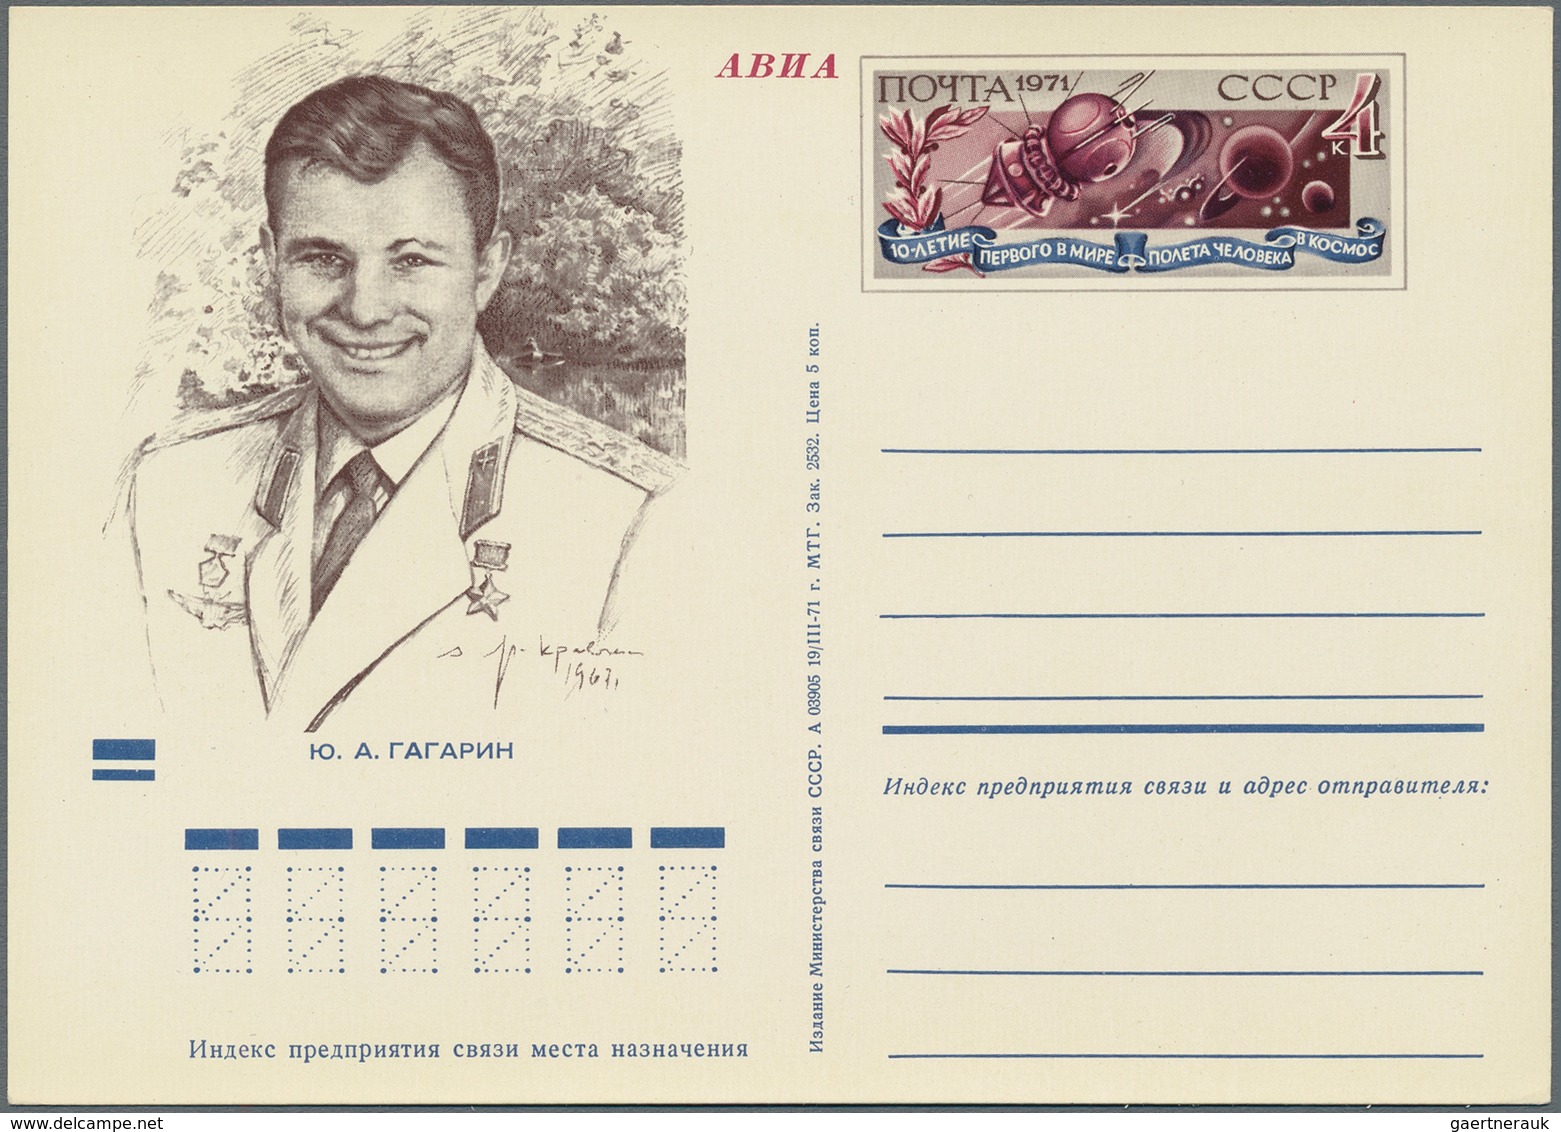 Sowjetunion - Ganzsachen: 1971/77 Ca. 2.260 Unused Postal Stationery Postcards And Envelopes, All Wi - Unclassified